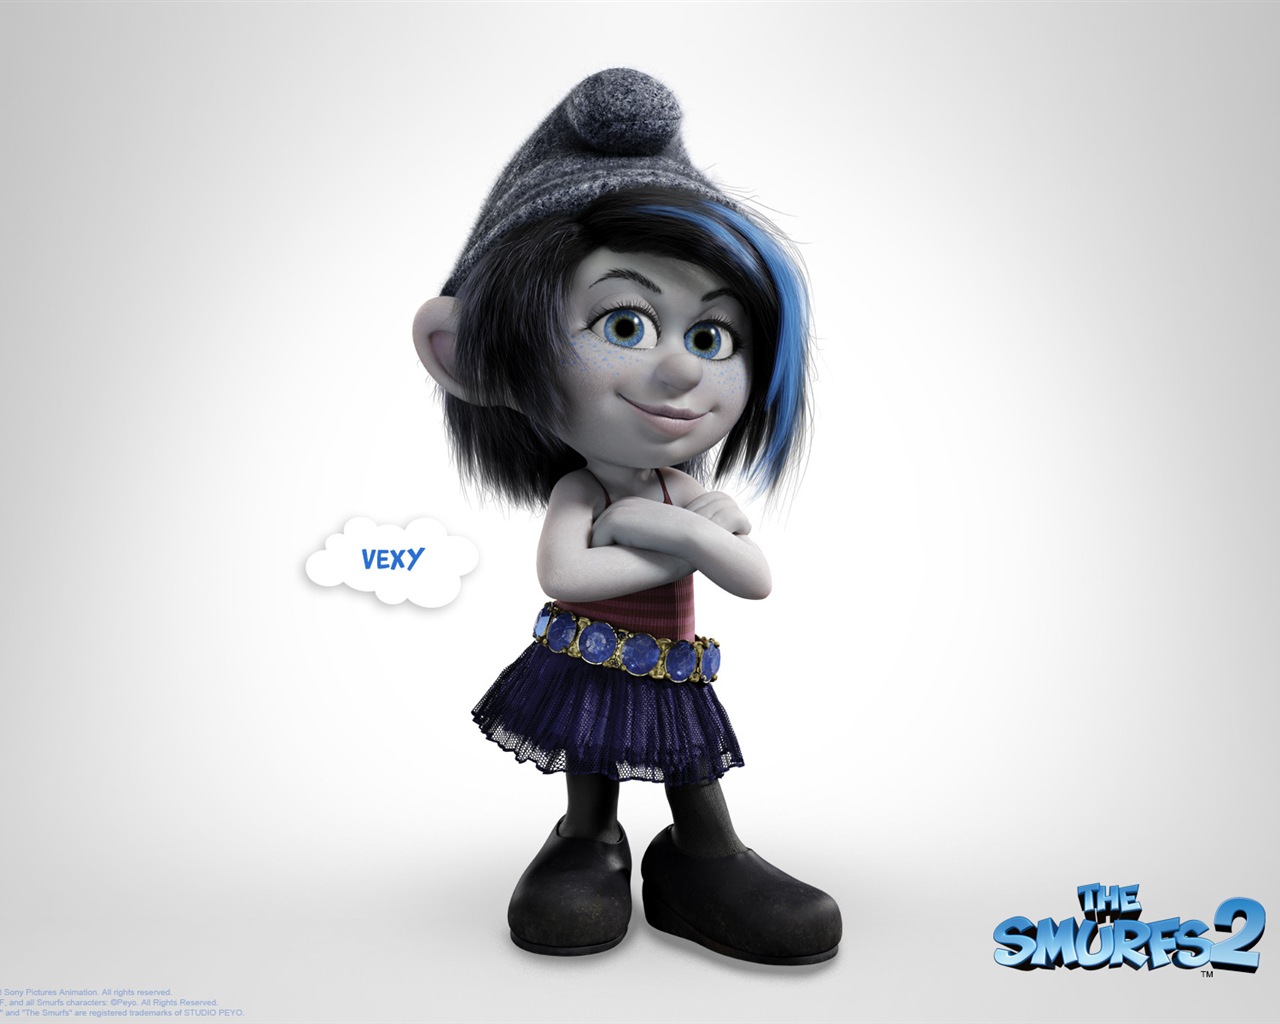 The Smurfs 2 HD movie wallpapers #11 - 1280x1024